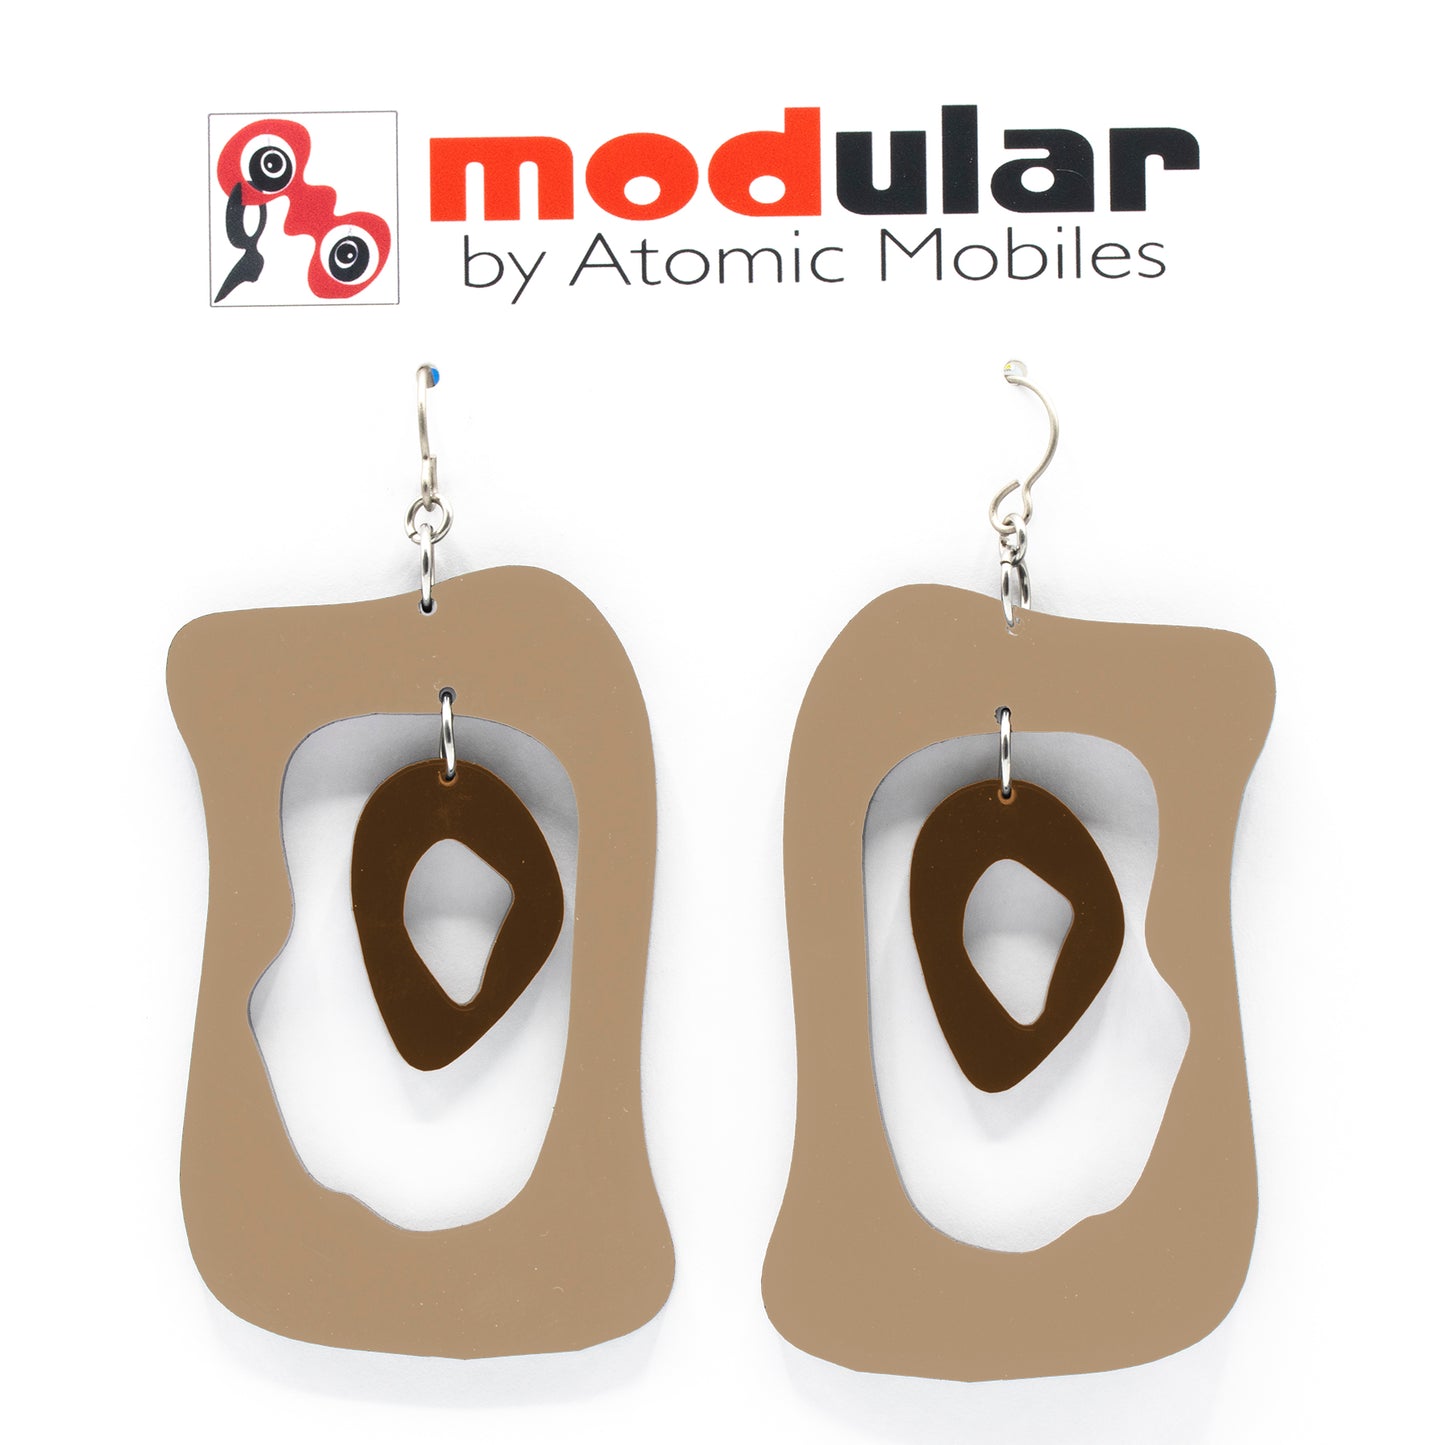 MODular Earrings - Modern Bliss Statement Earrings in Beige Tan and Brown by AtomicMobiles.com - retro era inspired mod handmade jewelry